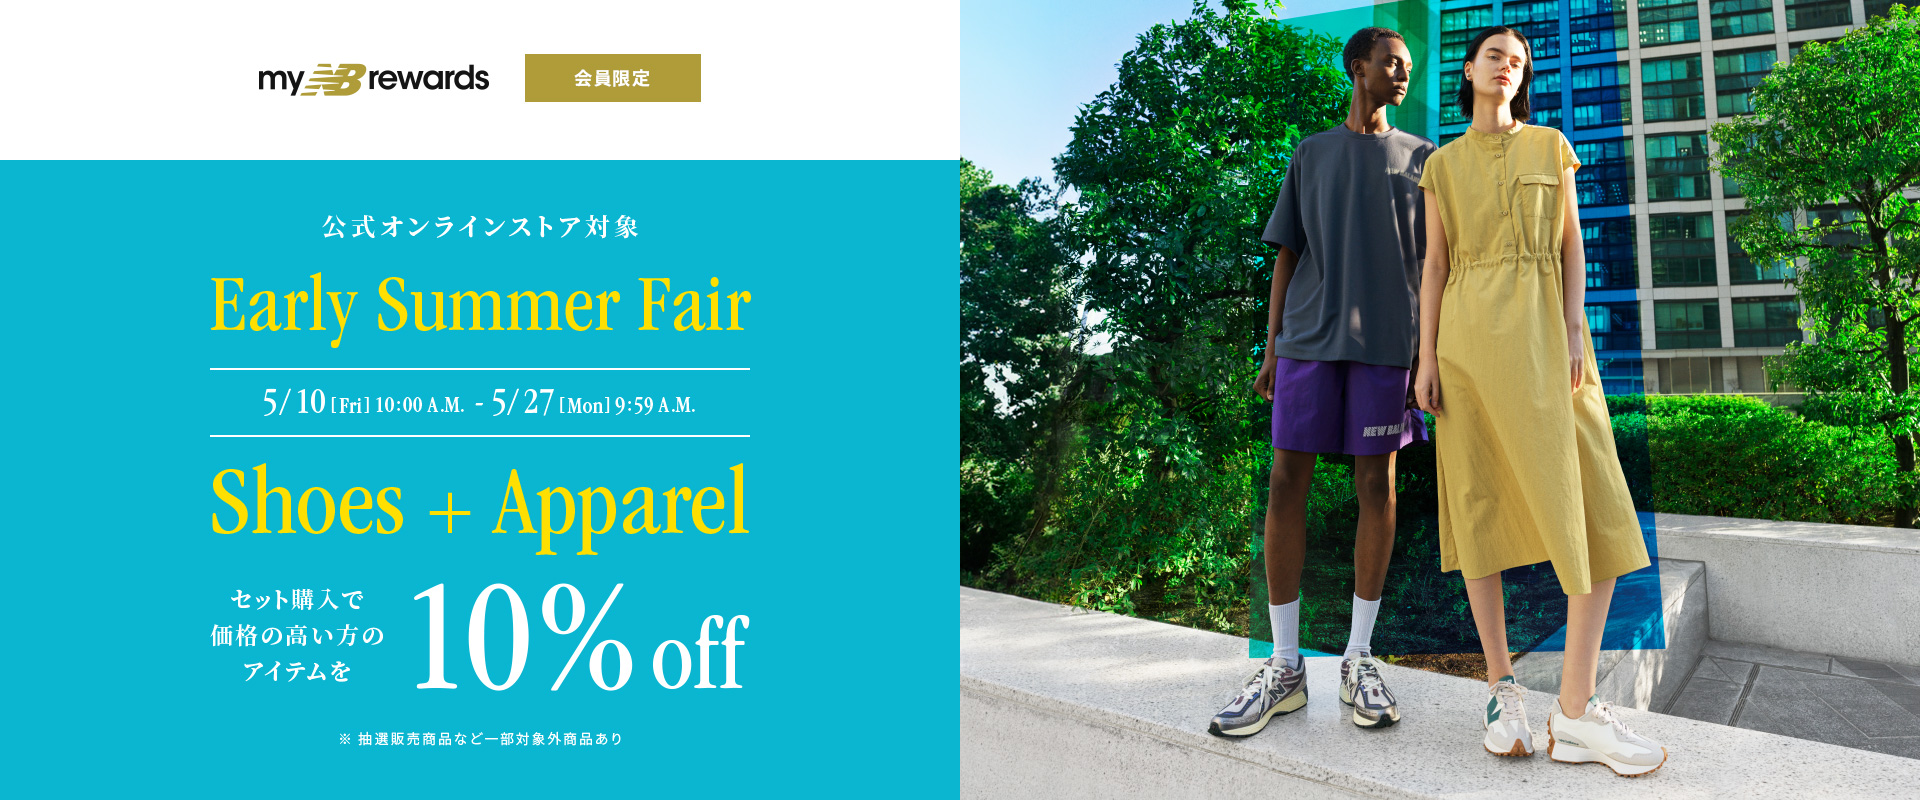 Exclusive to myNB members. Applicable to the official online store. Early Summer Fair 5/10 (Fri) 10:00 AM - 5/27 (Mon) 09:59 AM. Buy a Shoes + Apparel set and get 10% off the more expensive item. *Some items, such as lottery sales, are excluded.